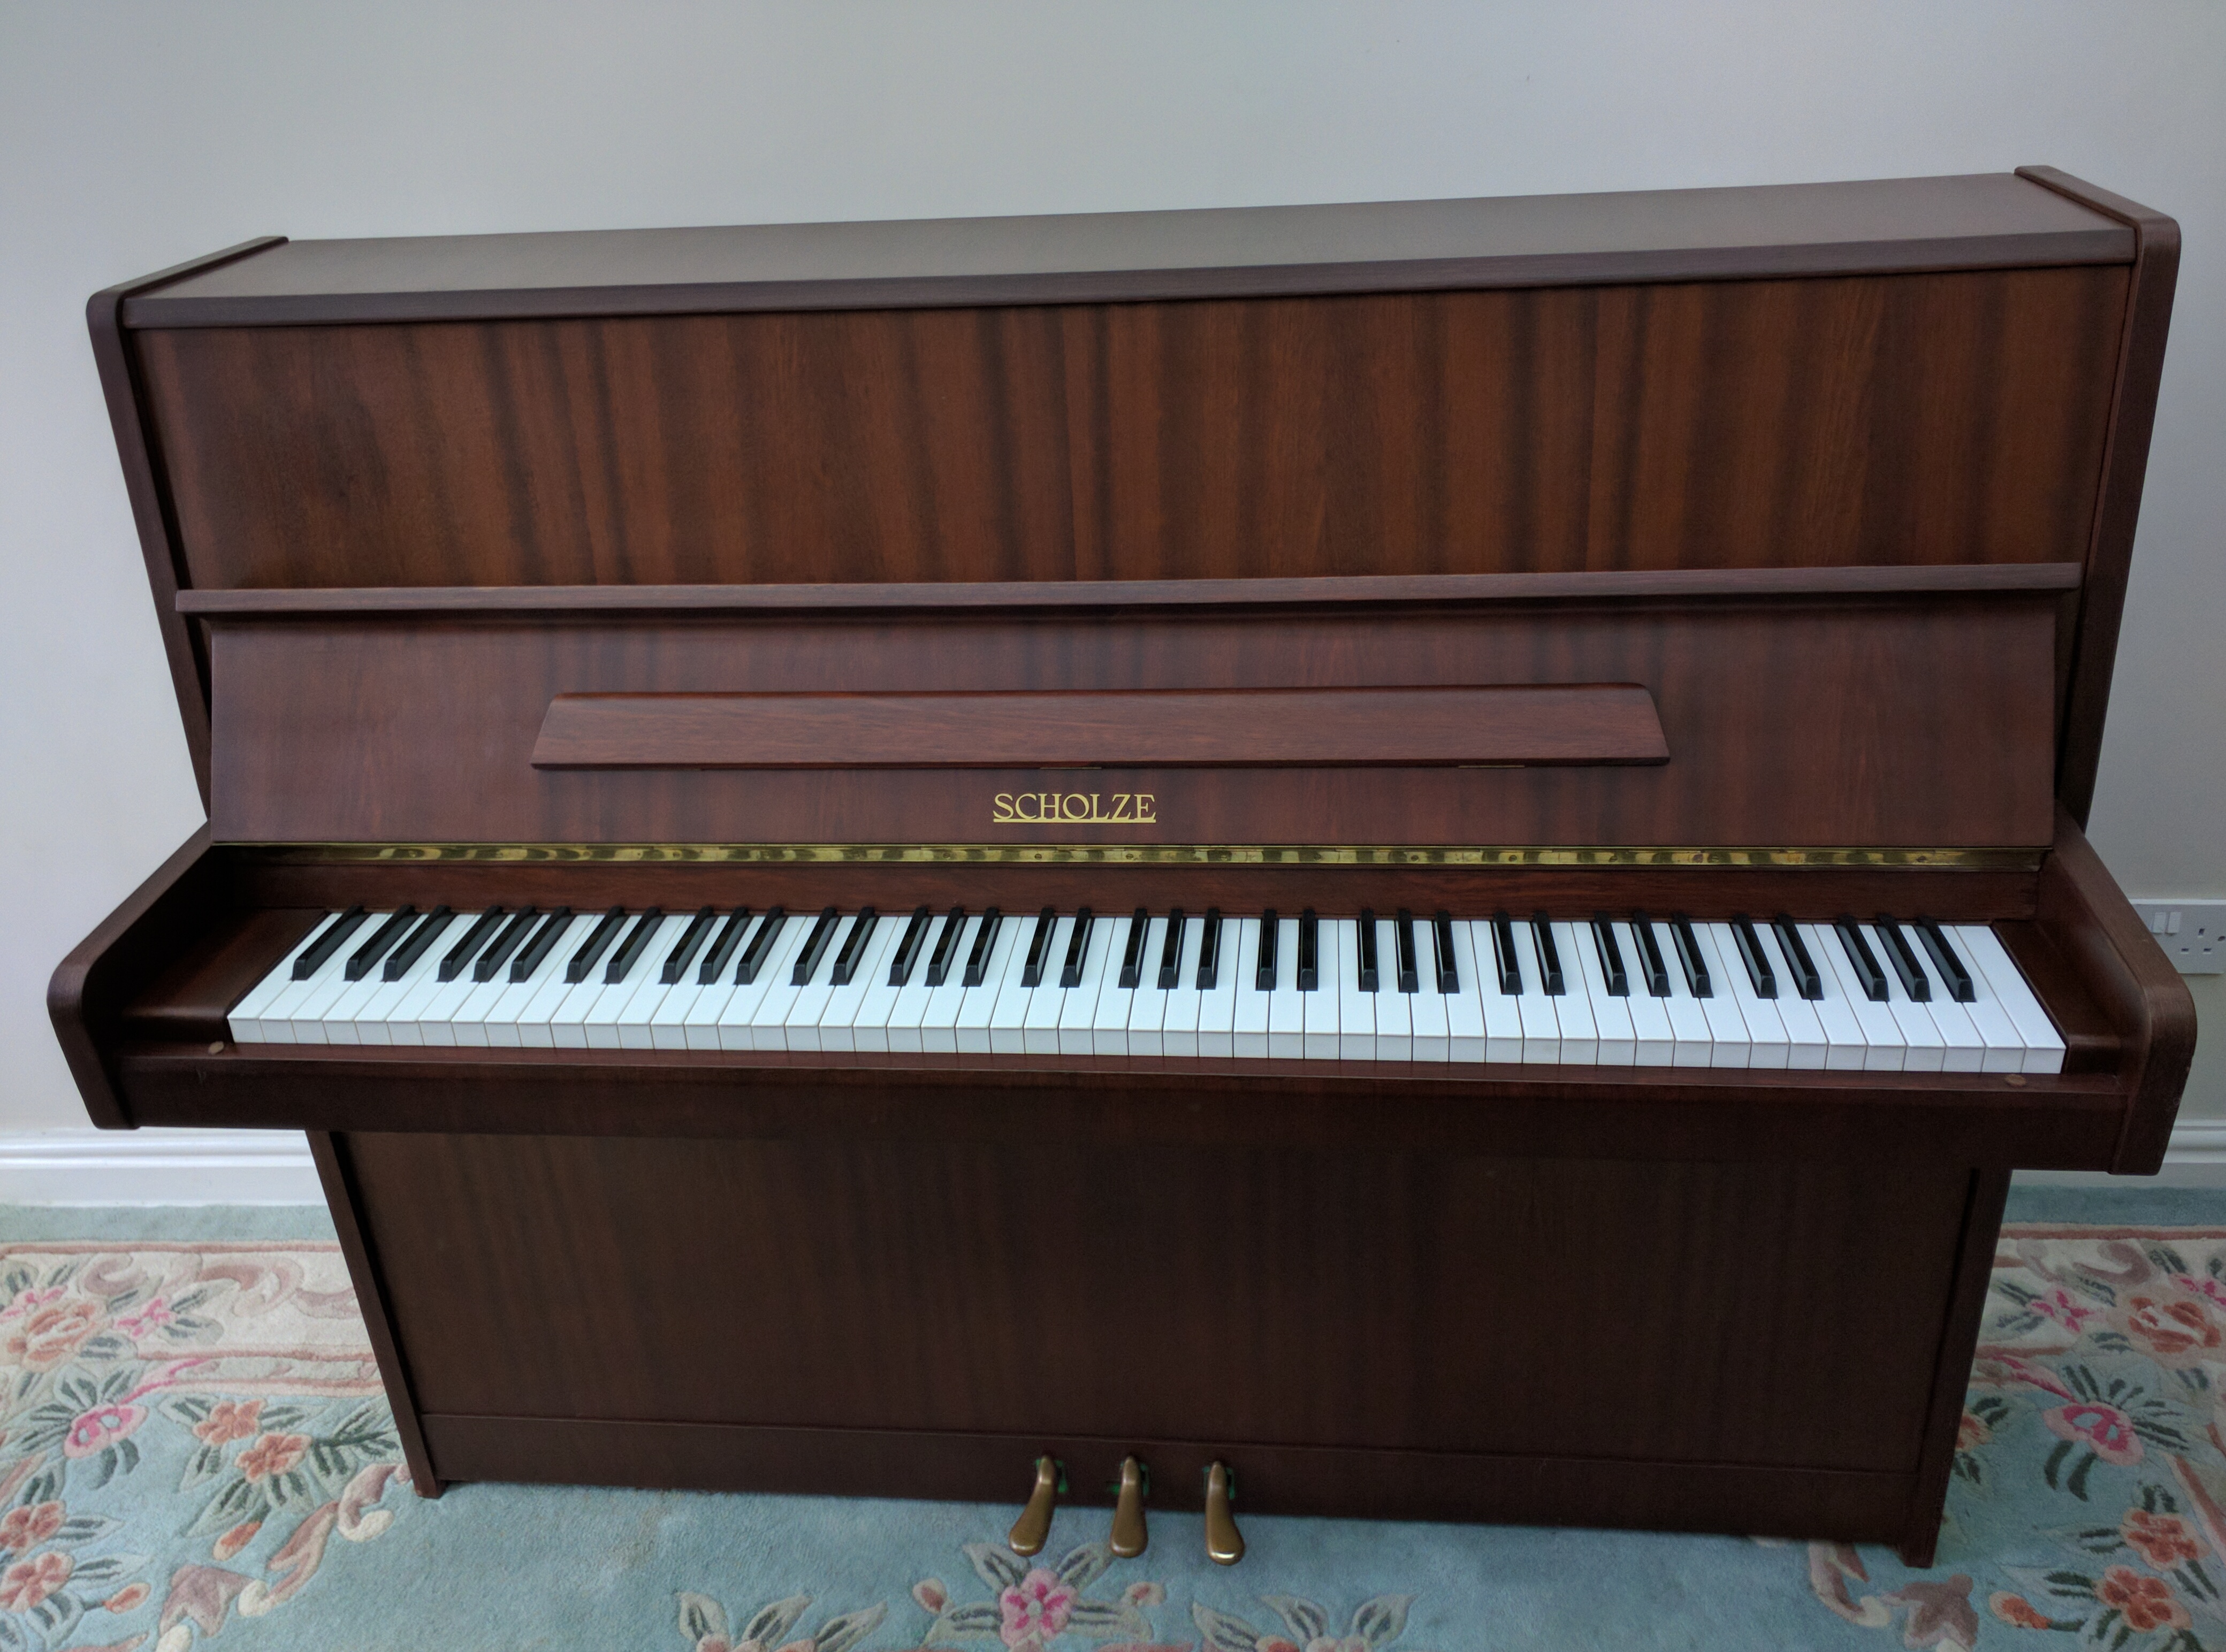 Scholze Upright Piano (made by Petrof)